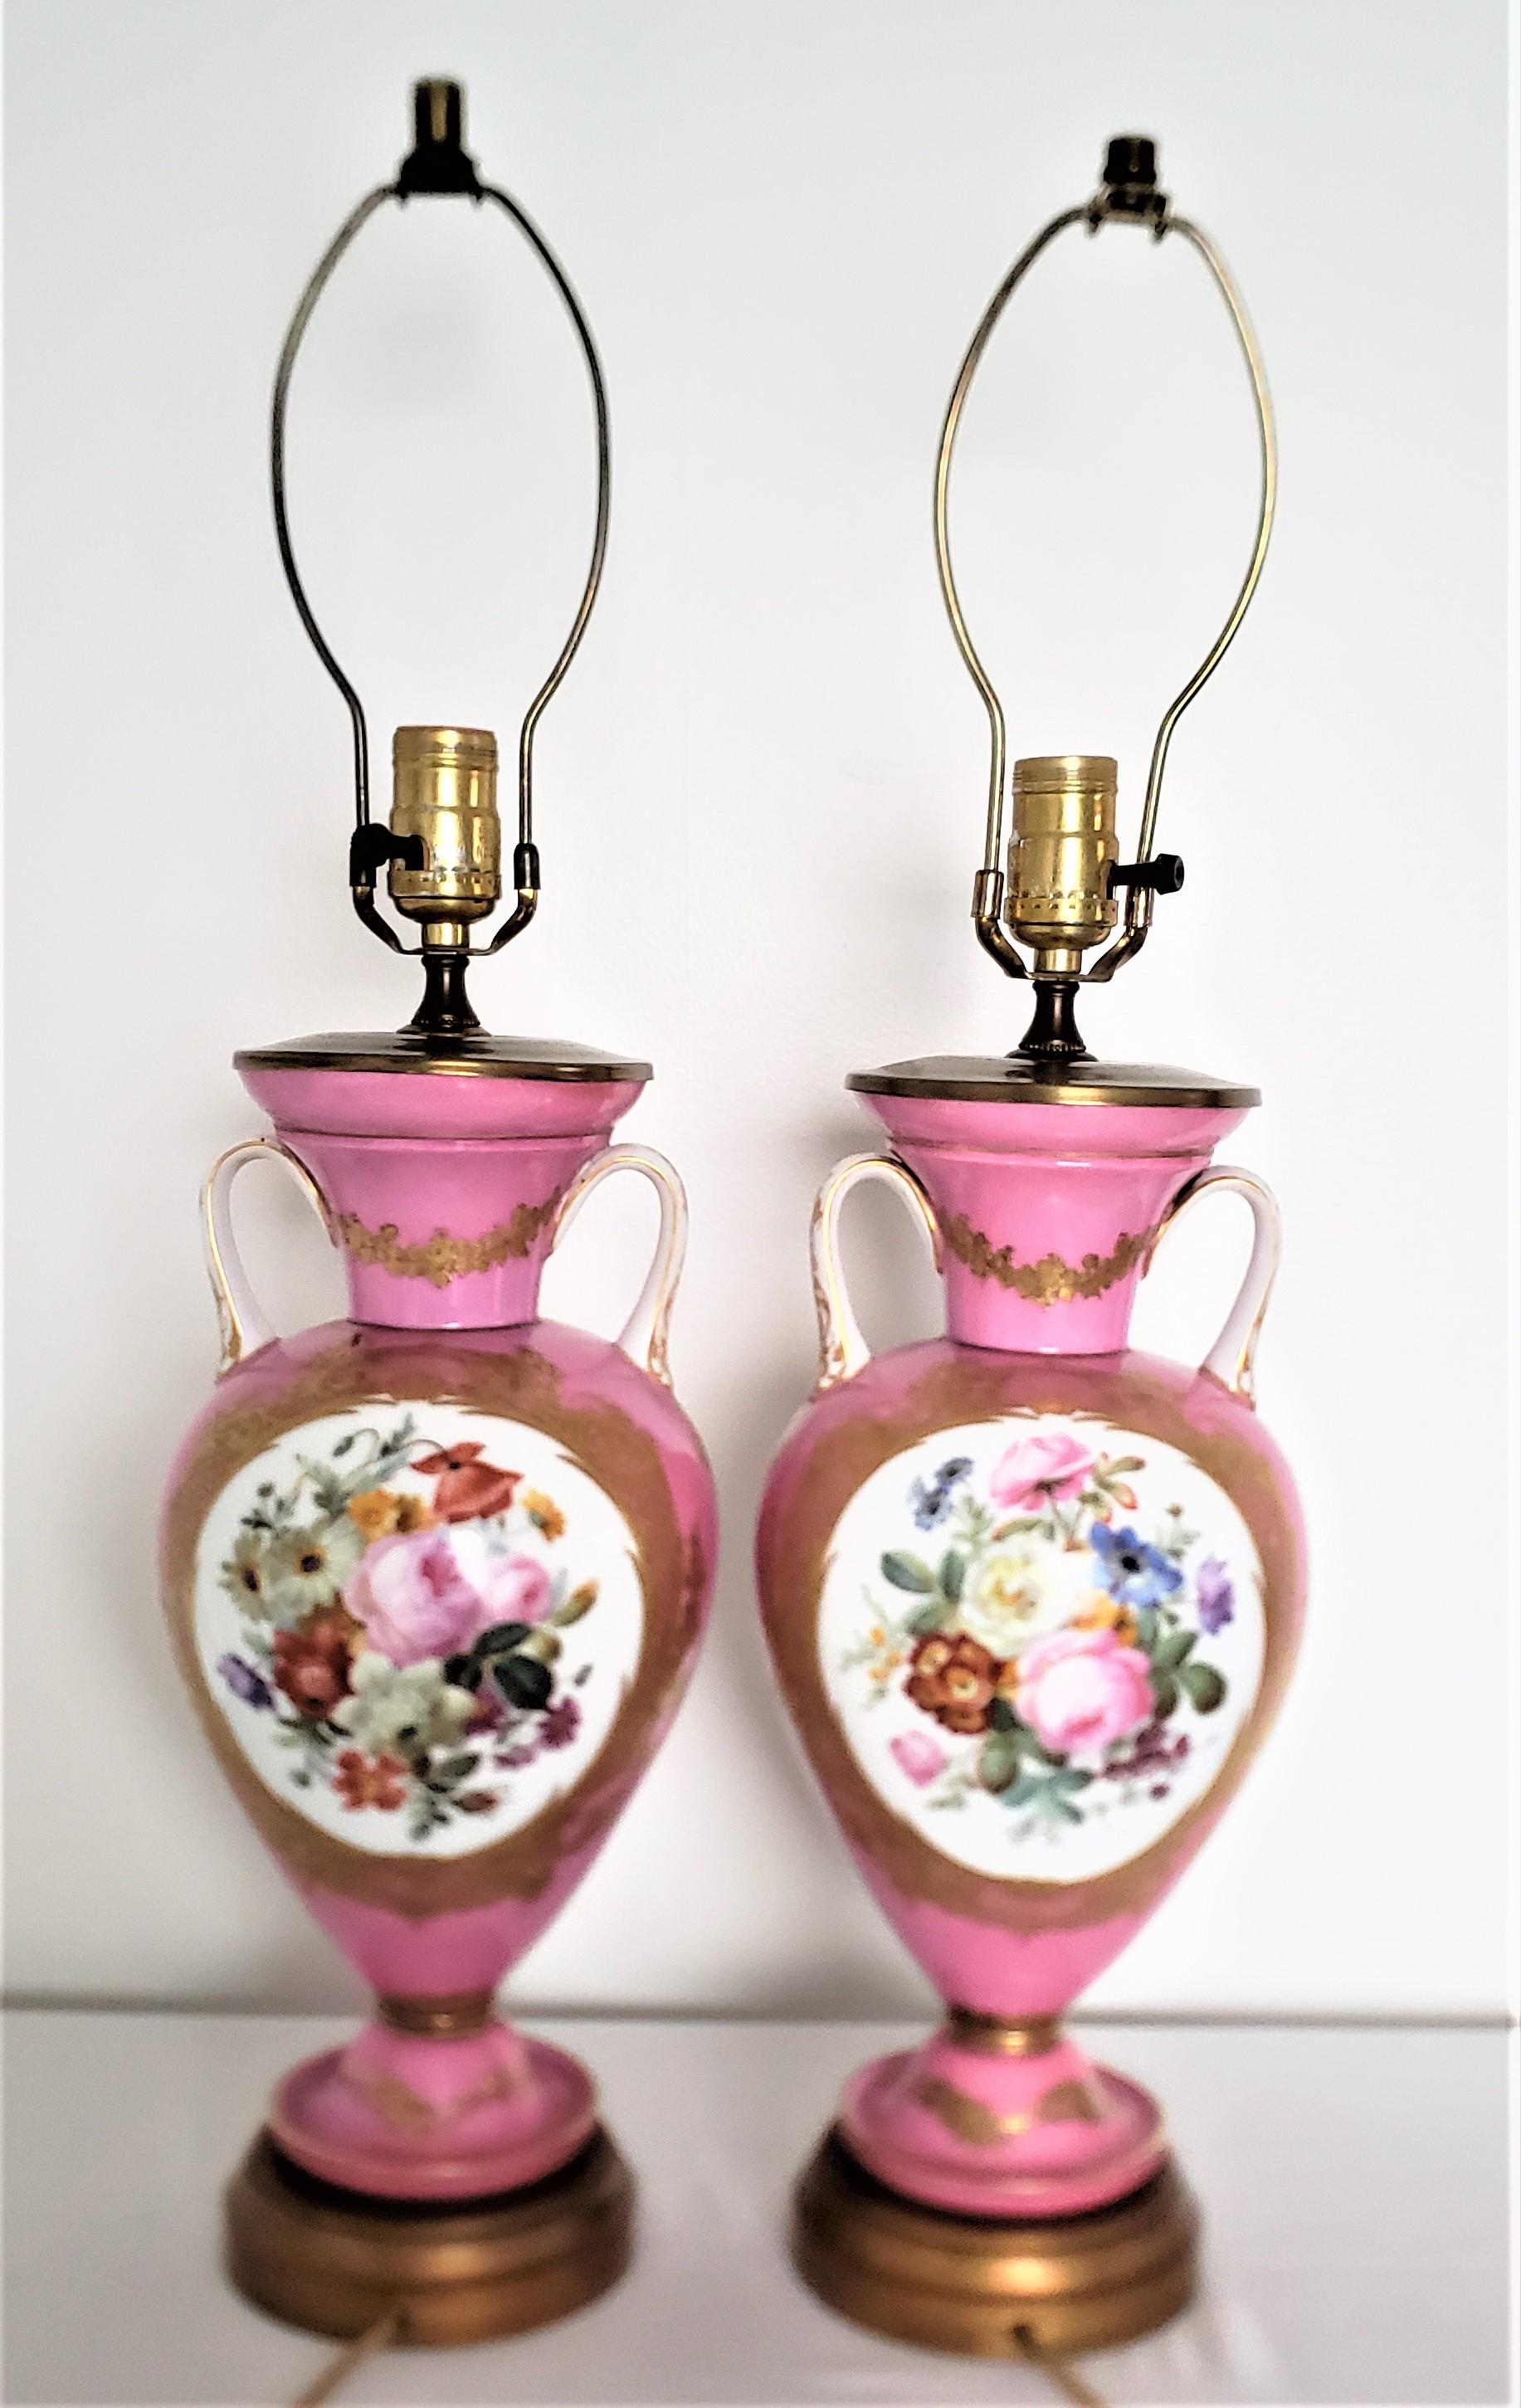 Pair of Antique French Sevres Style Hand-Painted Porcelain Pink Table Lamps  1